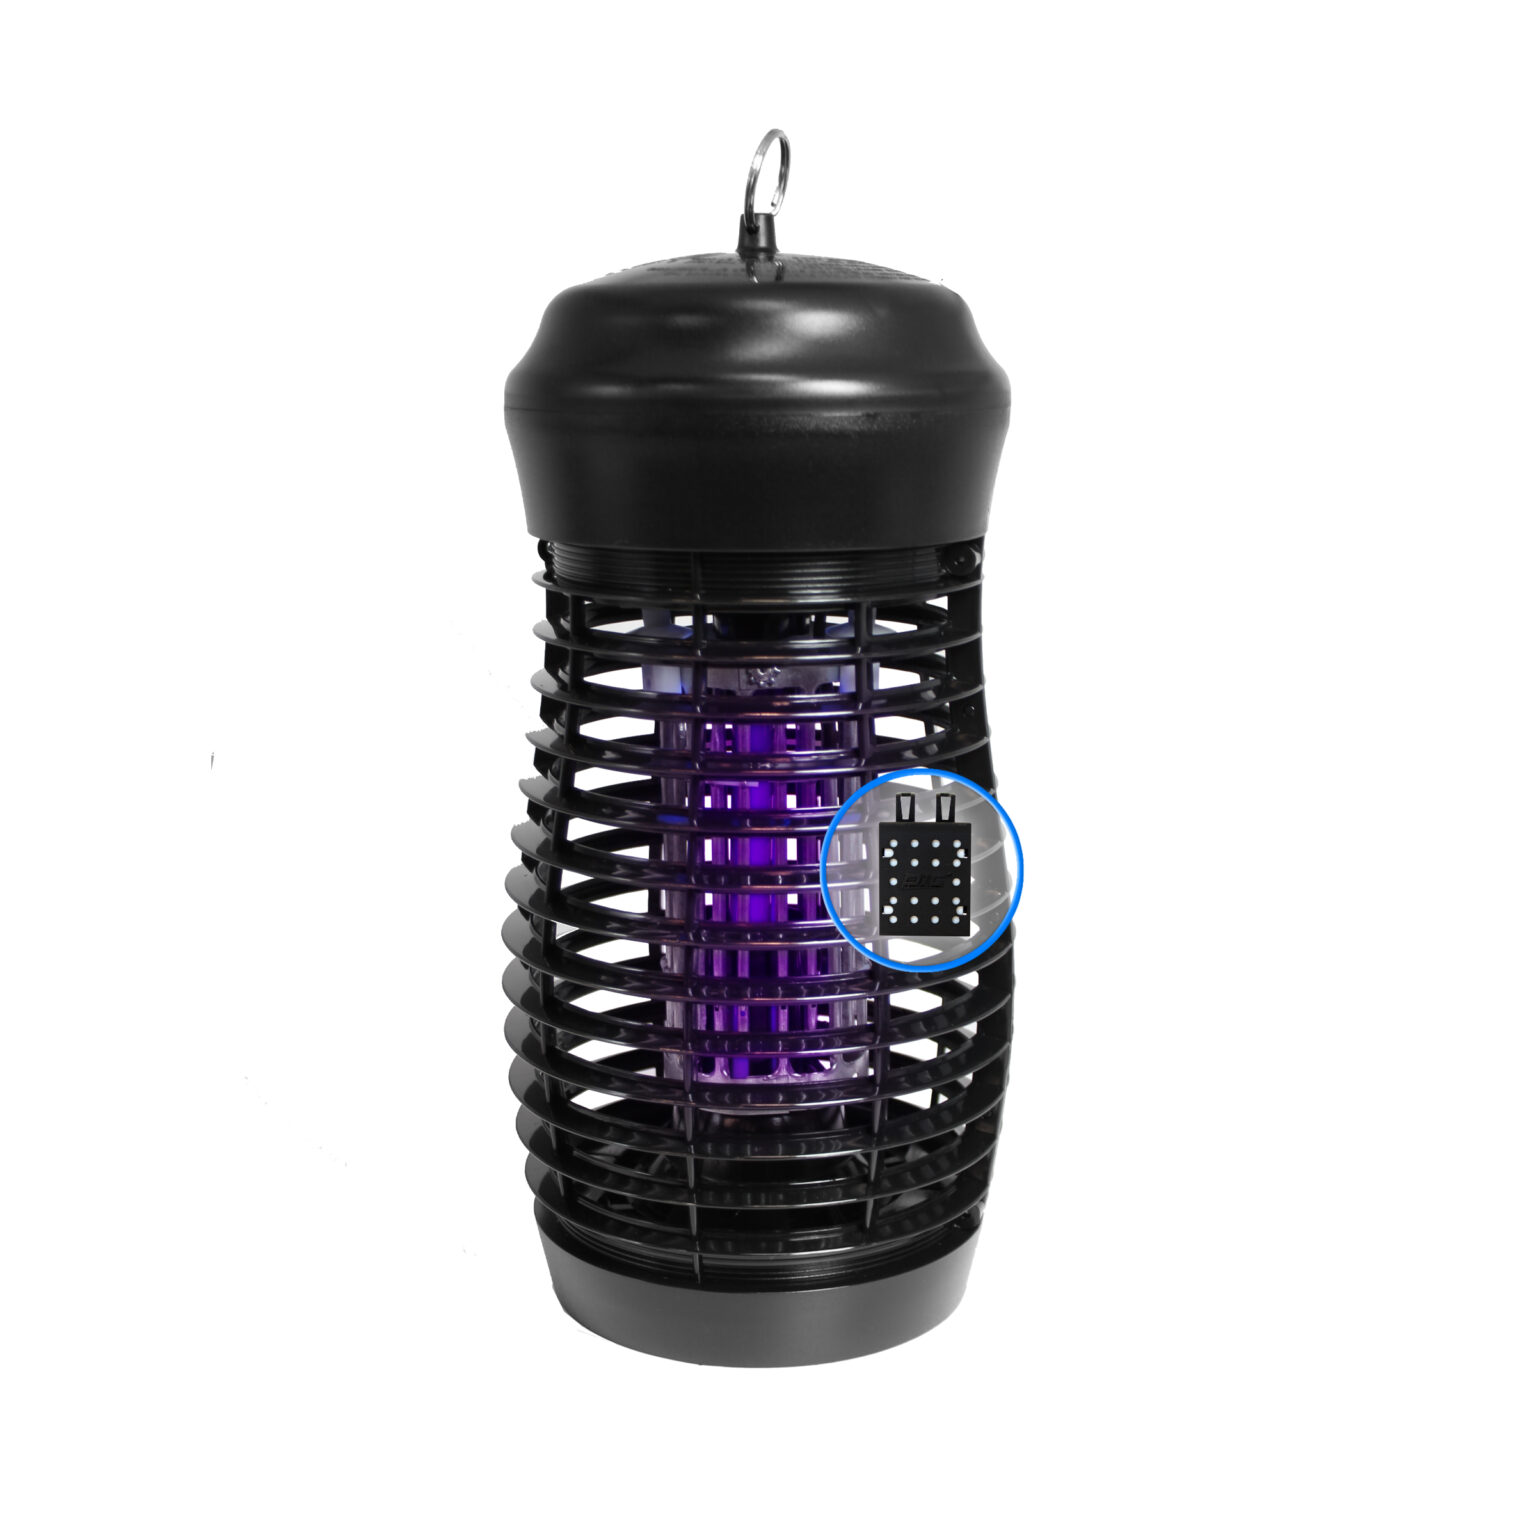 1 Deluxe Bug Zapper with 30 days Mosquito Lure - Pic Corp